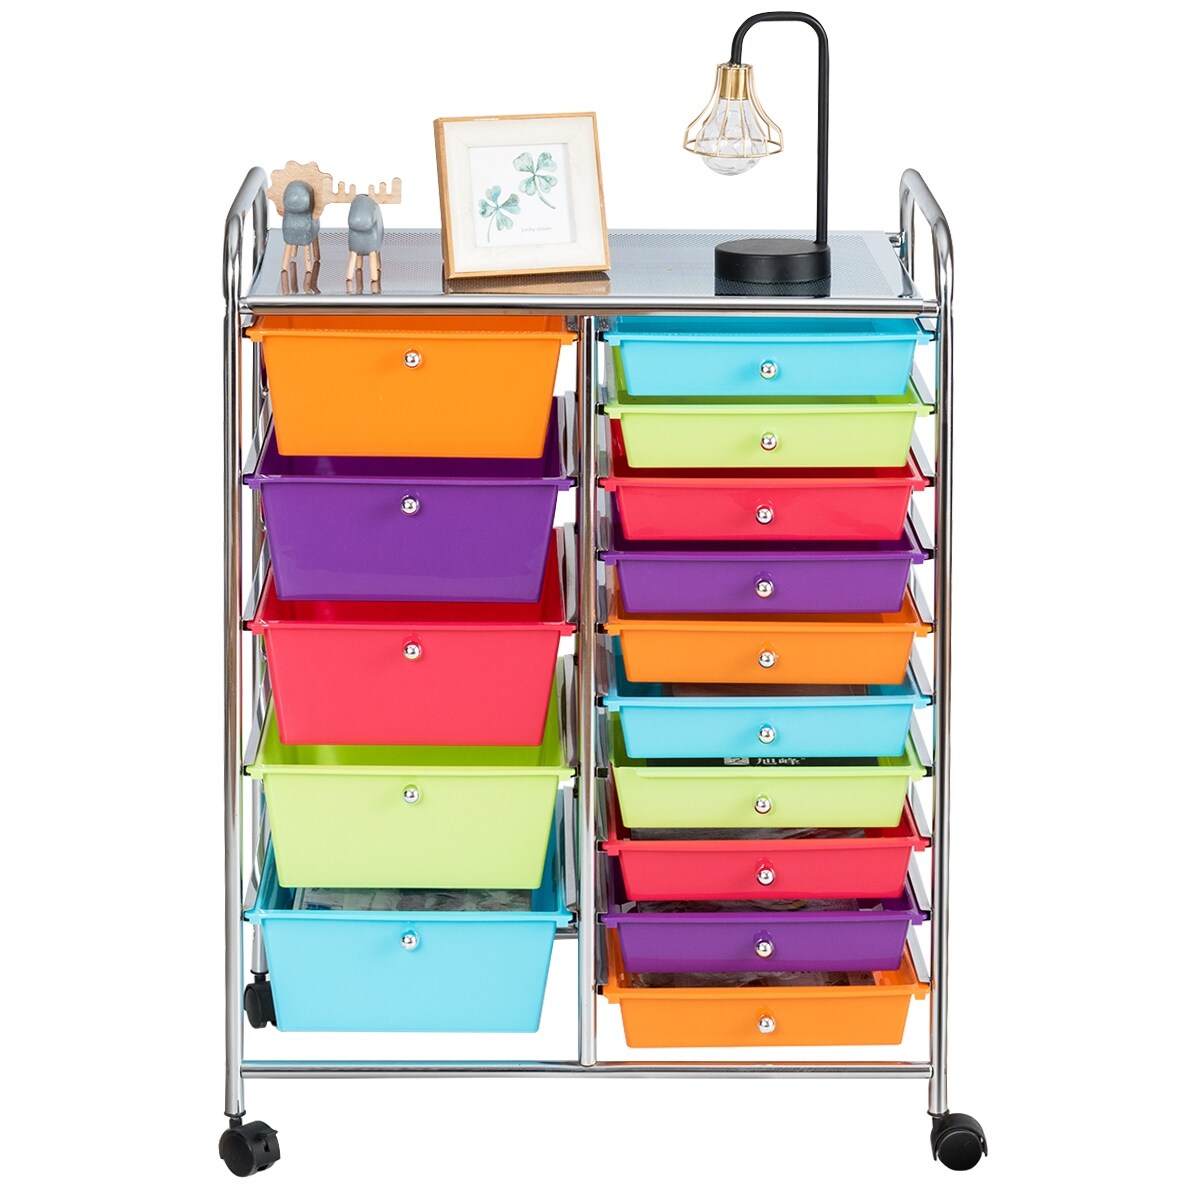 15 Drawer Mobile Organizing Tower Rolling Cart, Multi-Colored